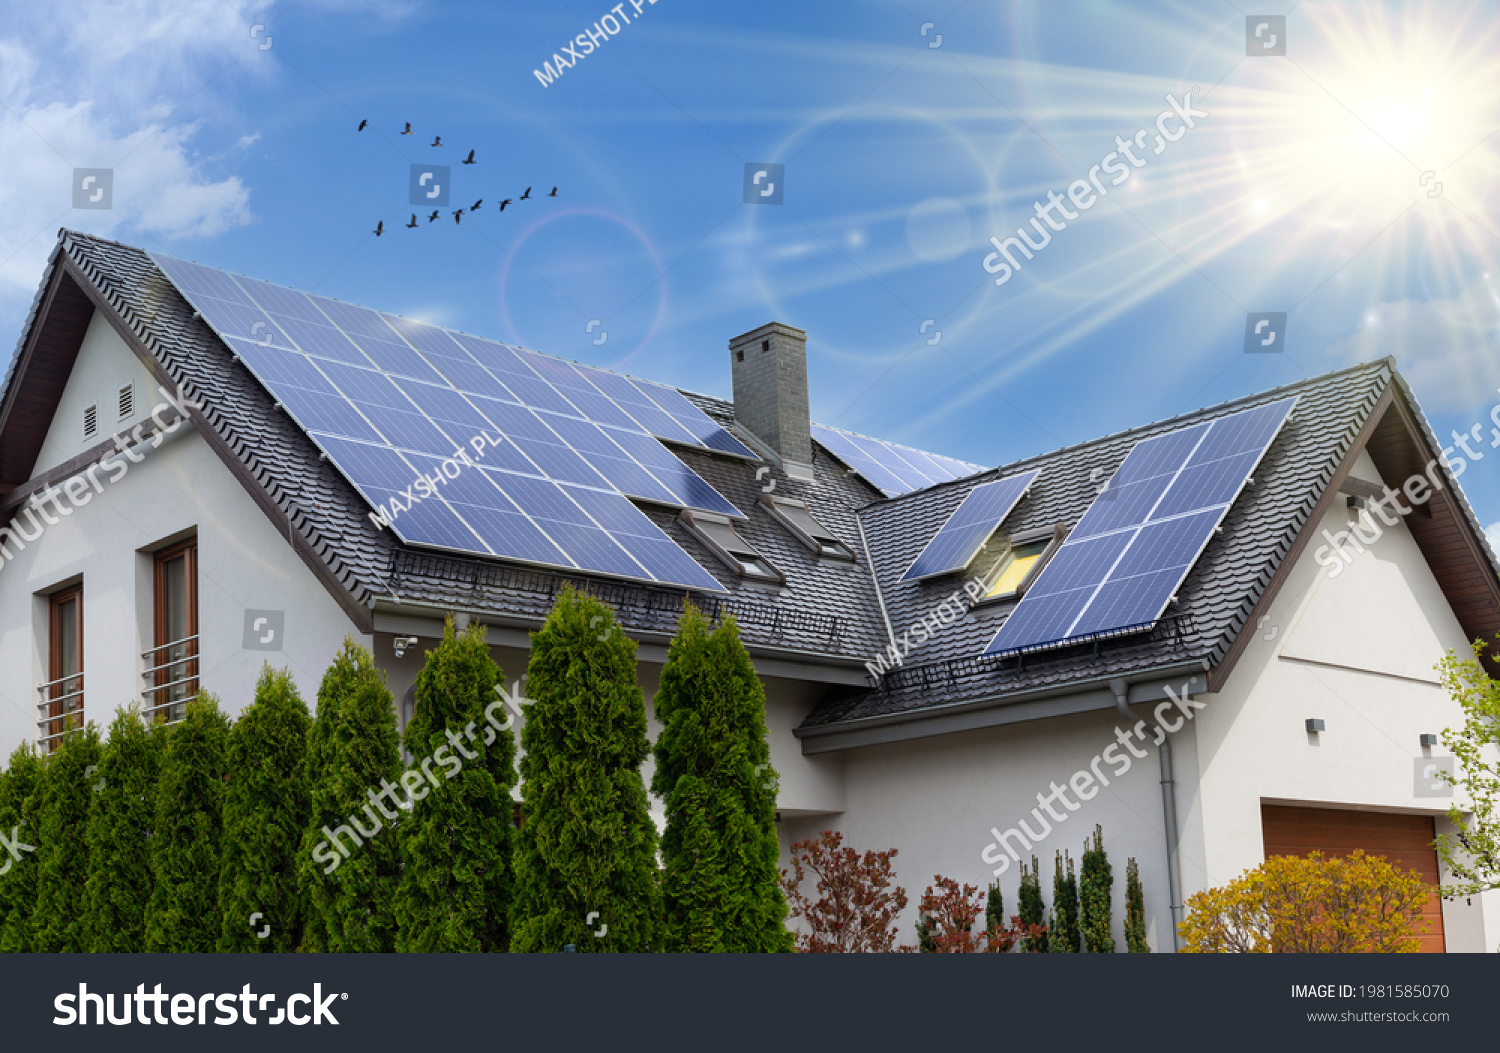 Solar panels on a gable roof. Beautiful, large modern house and solar energy. Rays of the sun. #1981585070